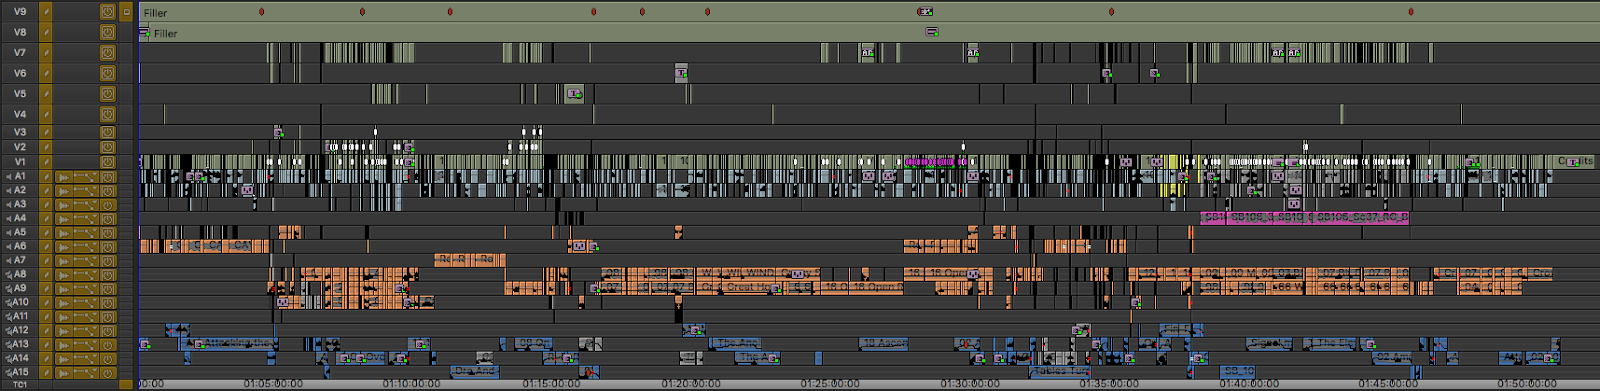 Timeline for an episode of Shadow and Bone